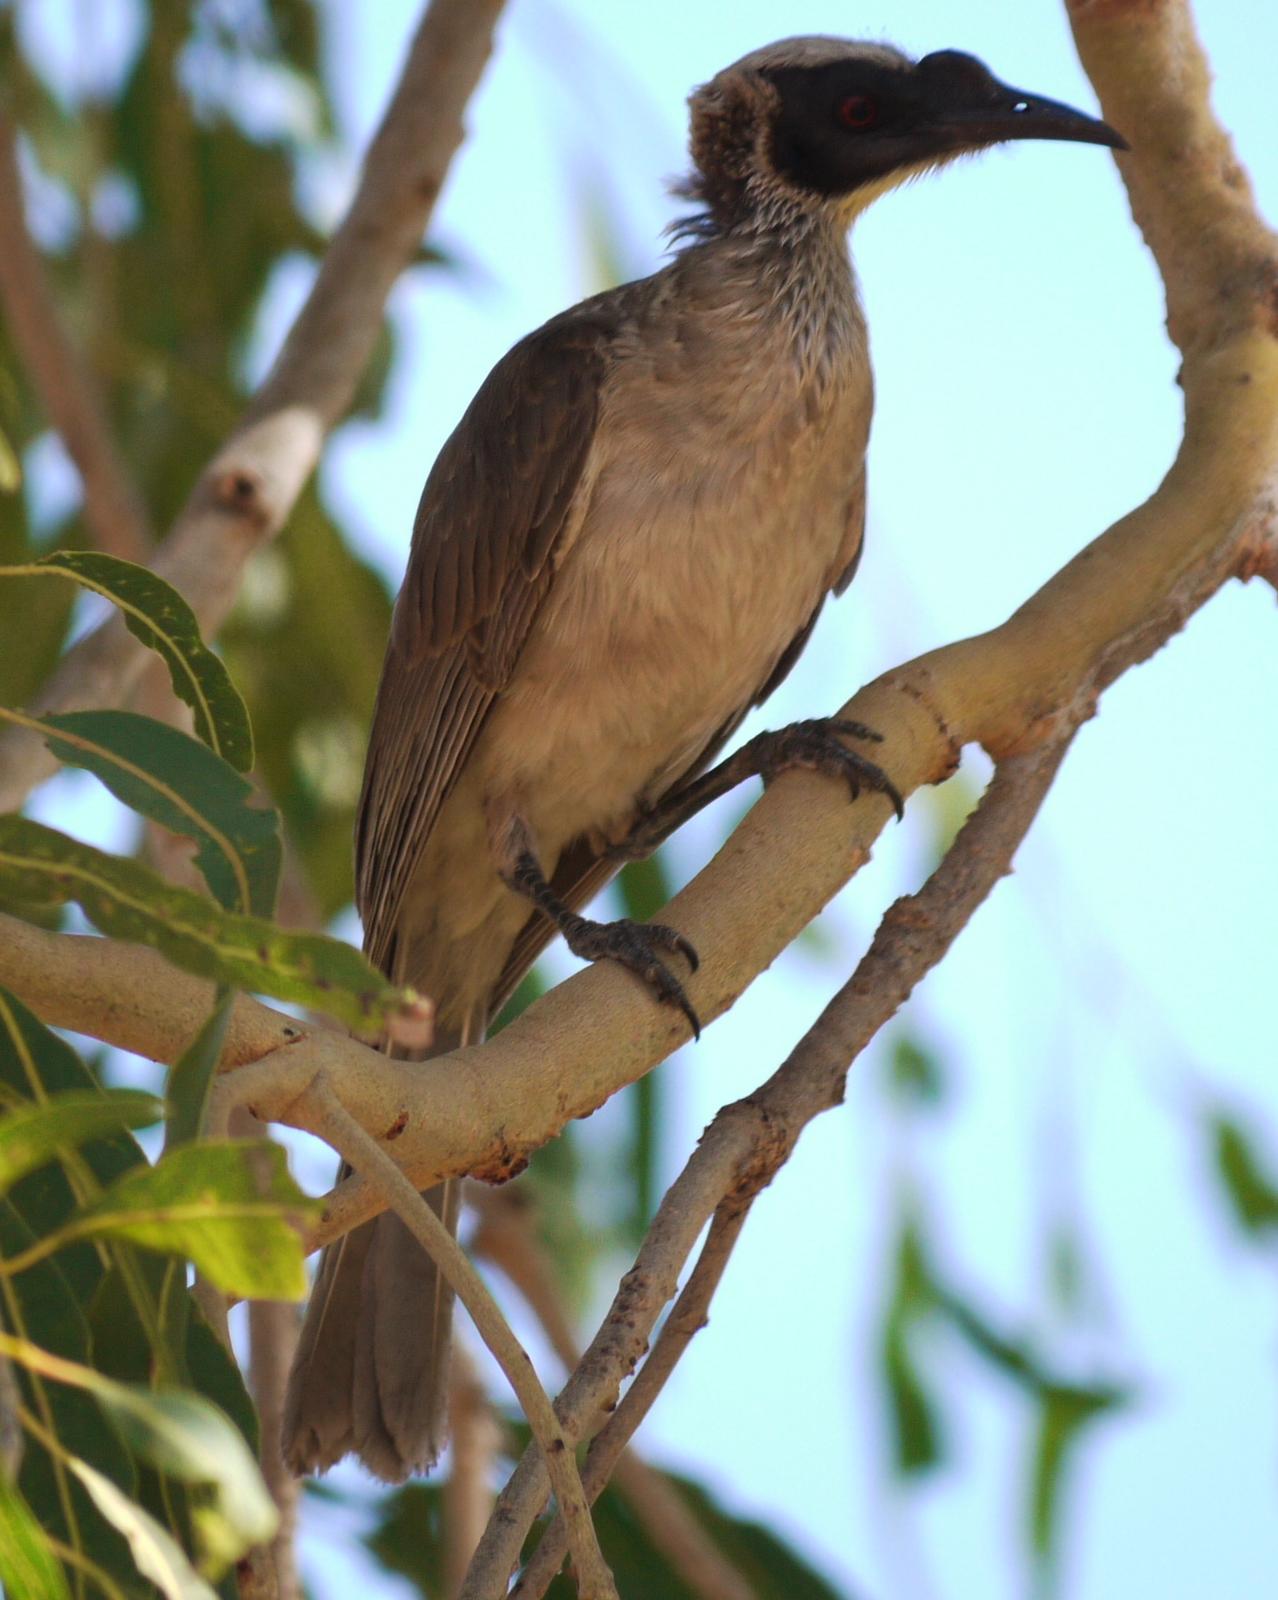 Silver-crowned Friarbird Photo by Peter Lowe